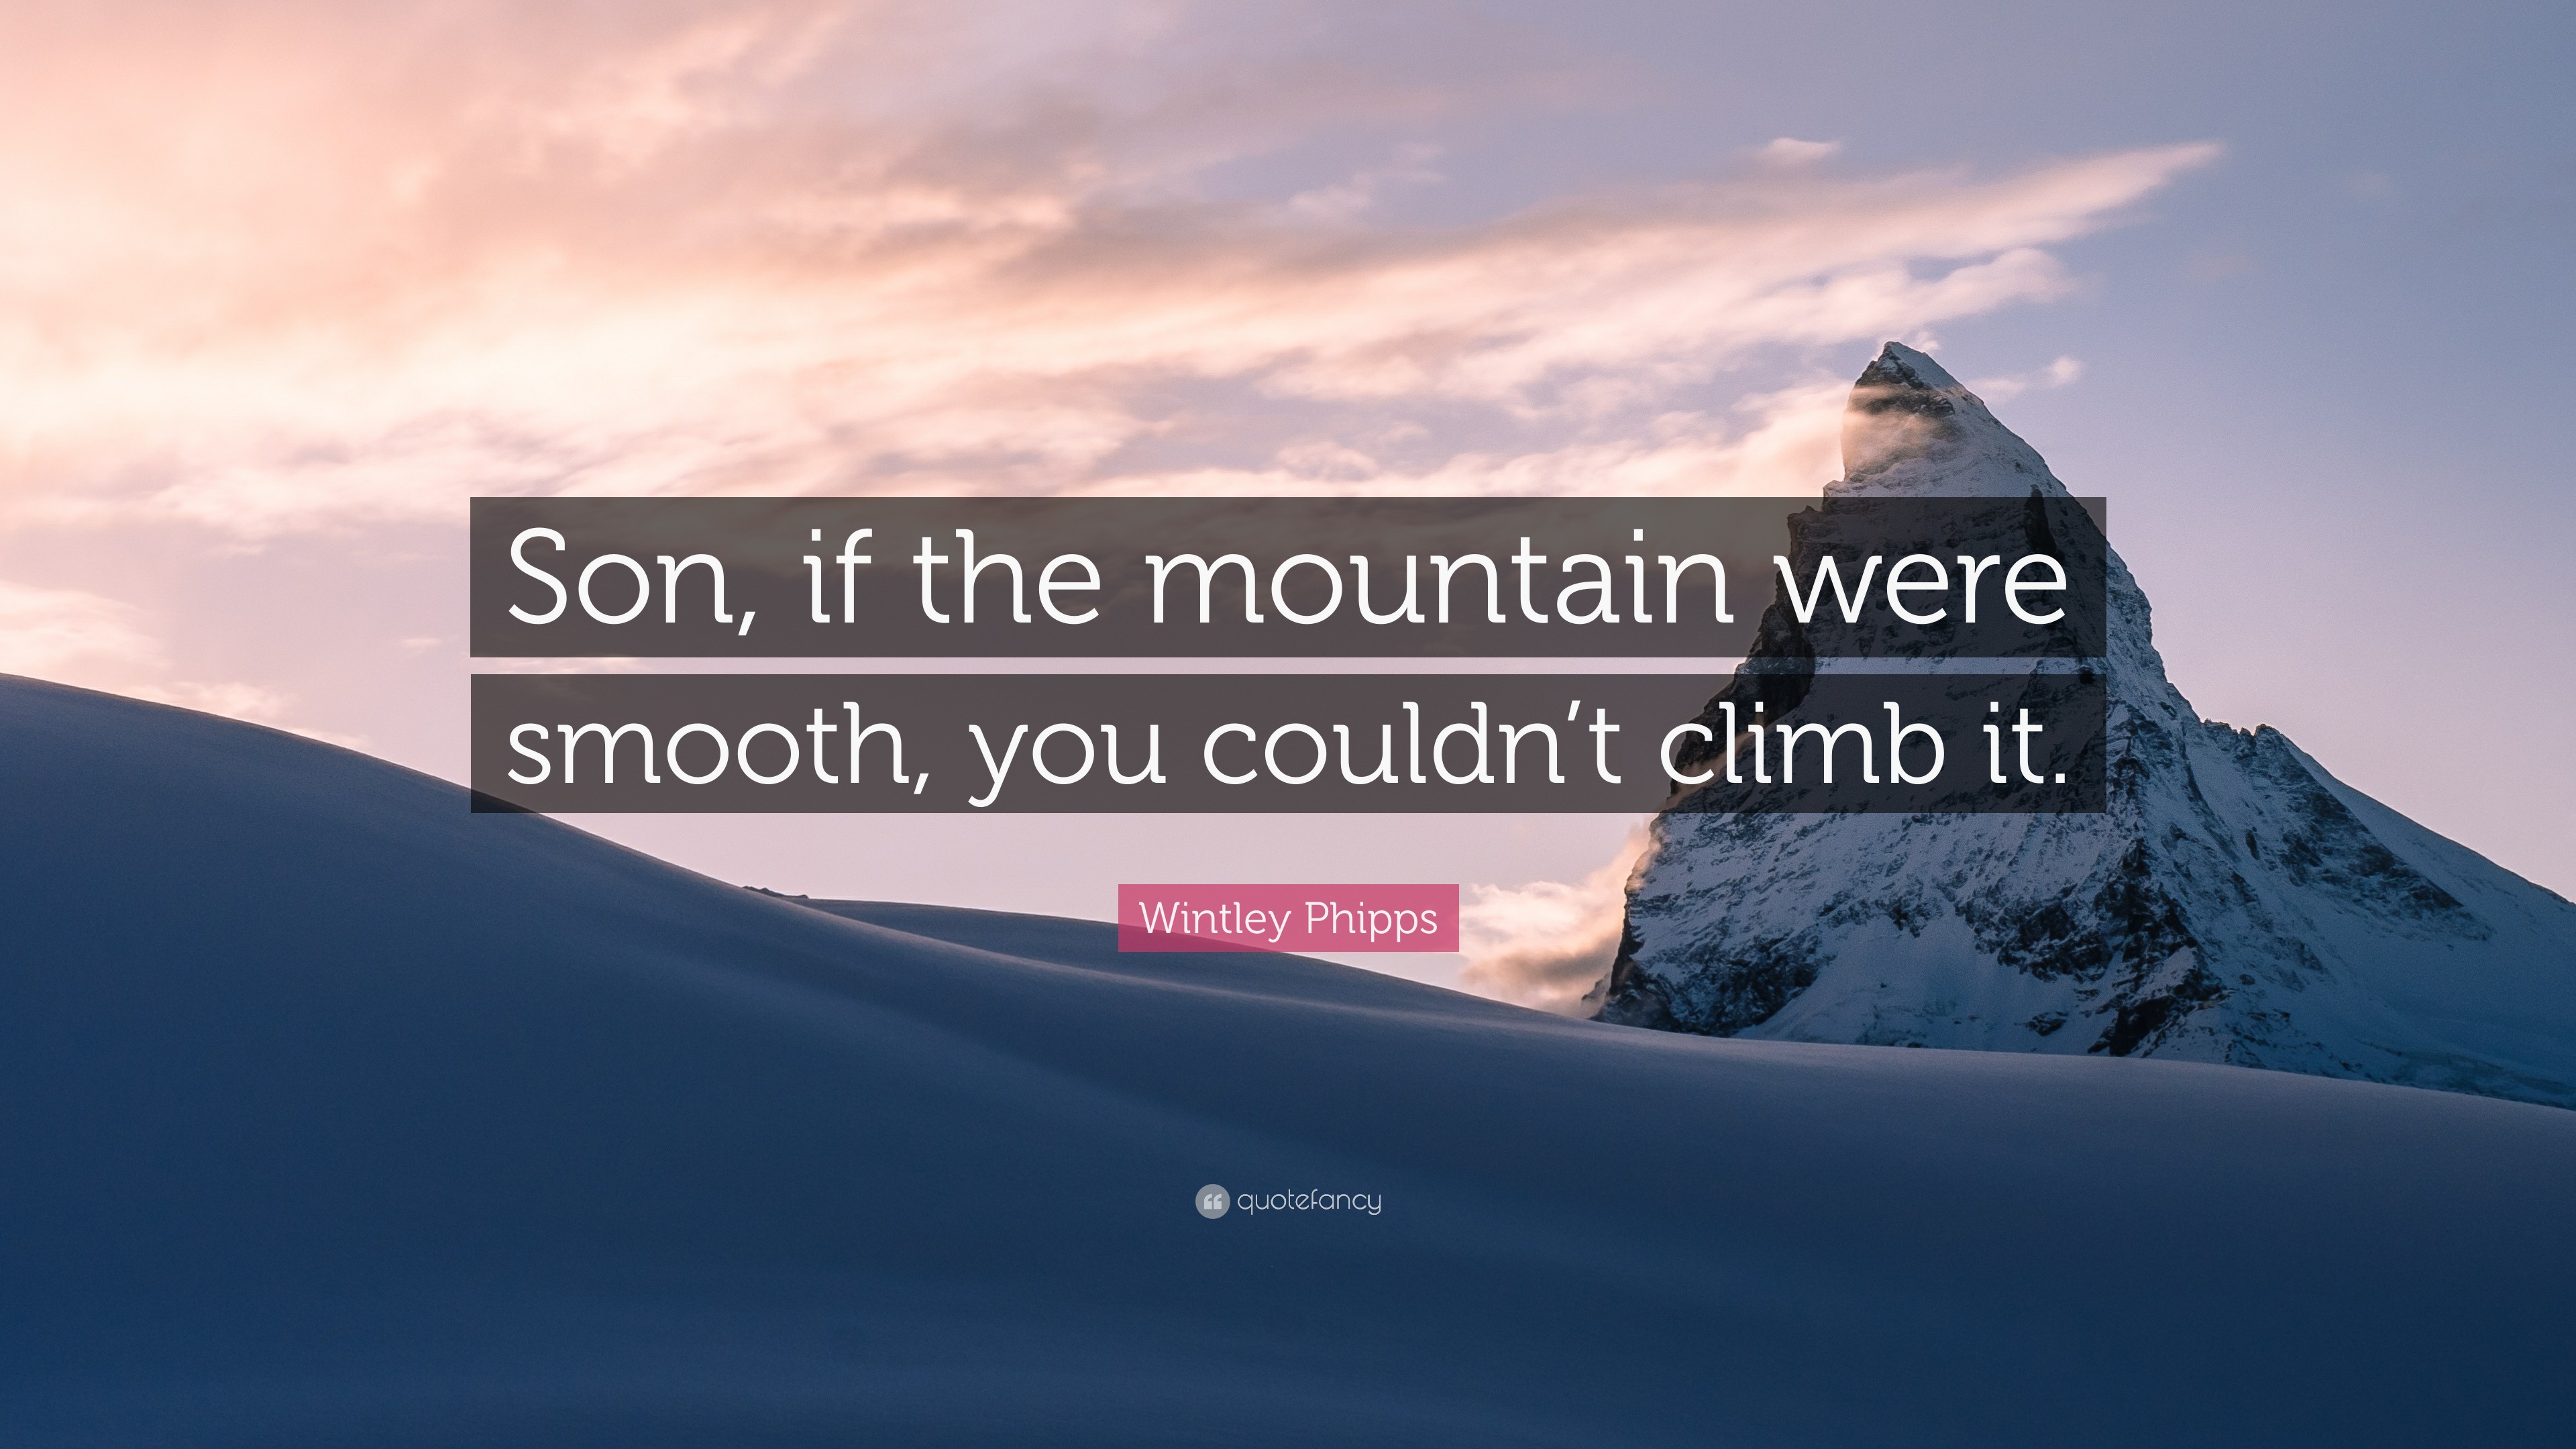 Wintley Phipps Quote: “Son, if the mountain were smooth, you